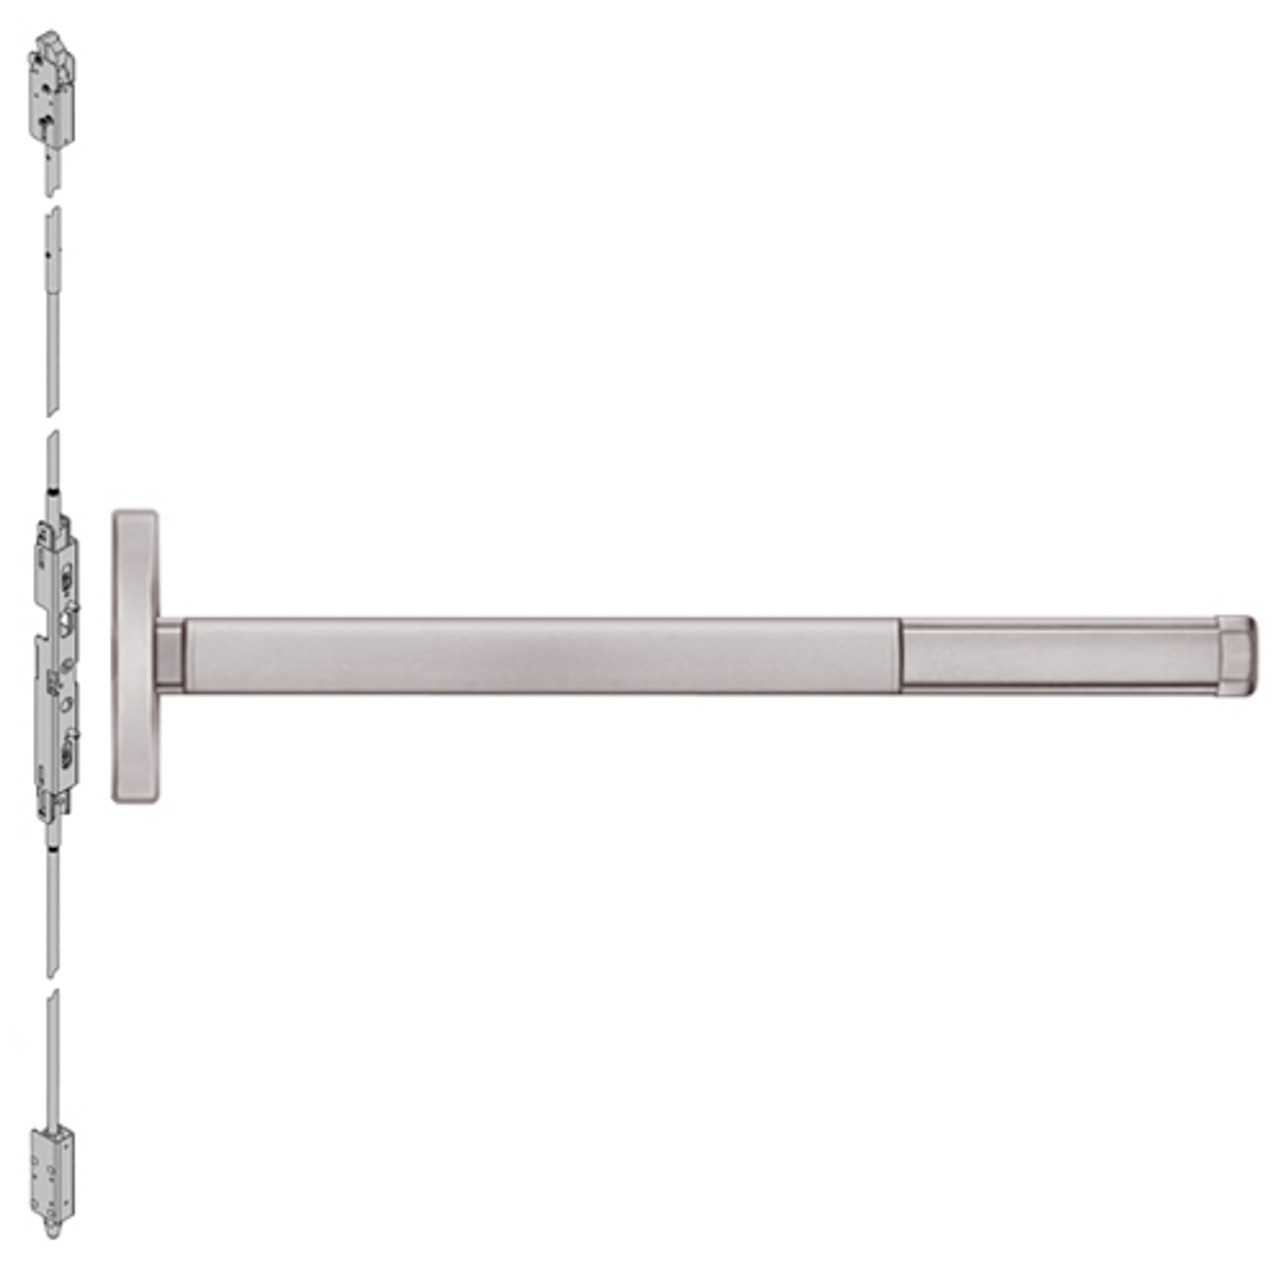 TS2602LBR-628-48 PHI 2600 Series Concealed Vertical Rod Exit Device with Touchbar Monitoring Switch Prepped for Dummy Trim in Satin Aluminum Finish